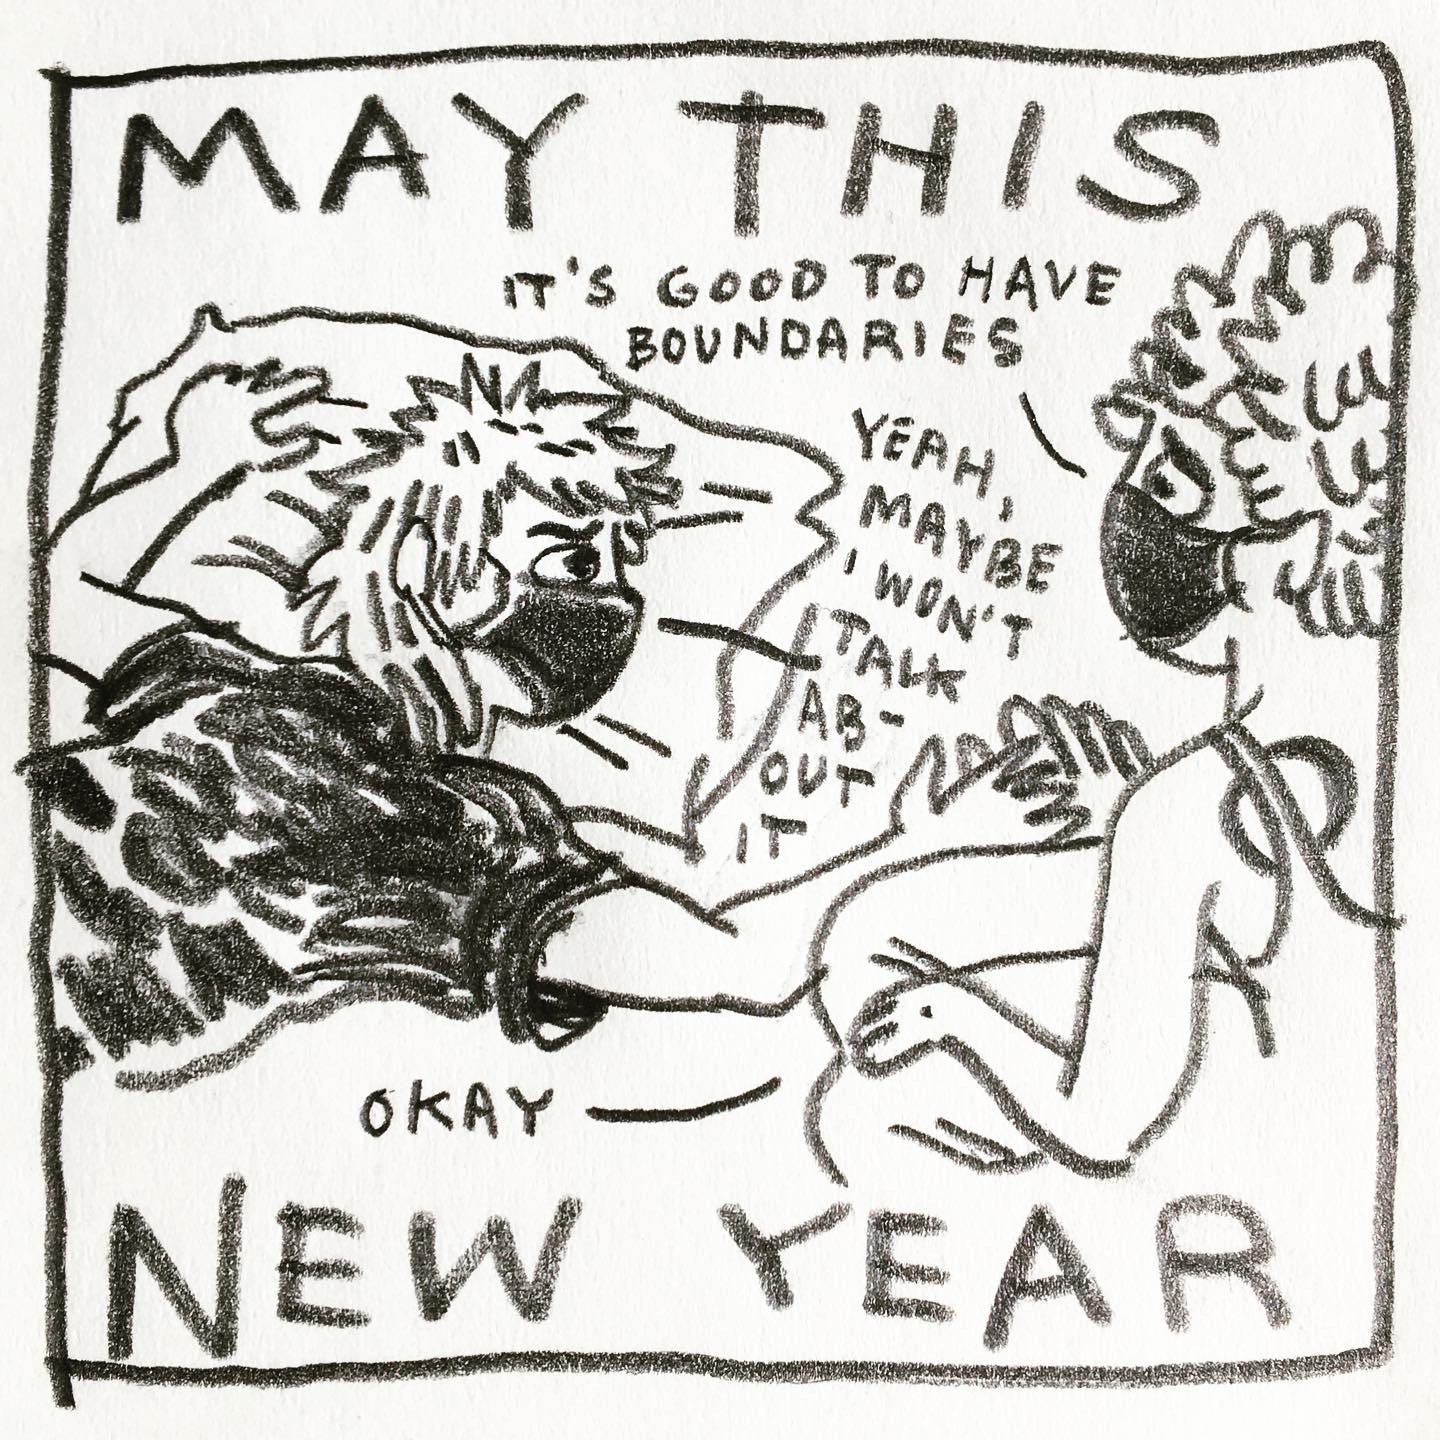 Panel 5: made this new year Image: a skinny person in a black T-shirt with choppy hair lays face down on a pillow, holding Lark’s hand. Lark is kneeling beside them. Both wear facemasks and look concerned. Lark says, "It's good to have boundaries." The other person replies "yeah, maybe I won't talk about it.” Lark replies "okay"